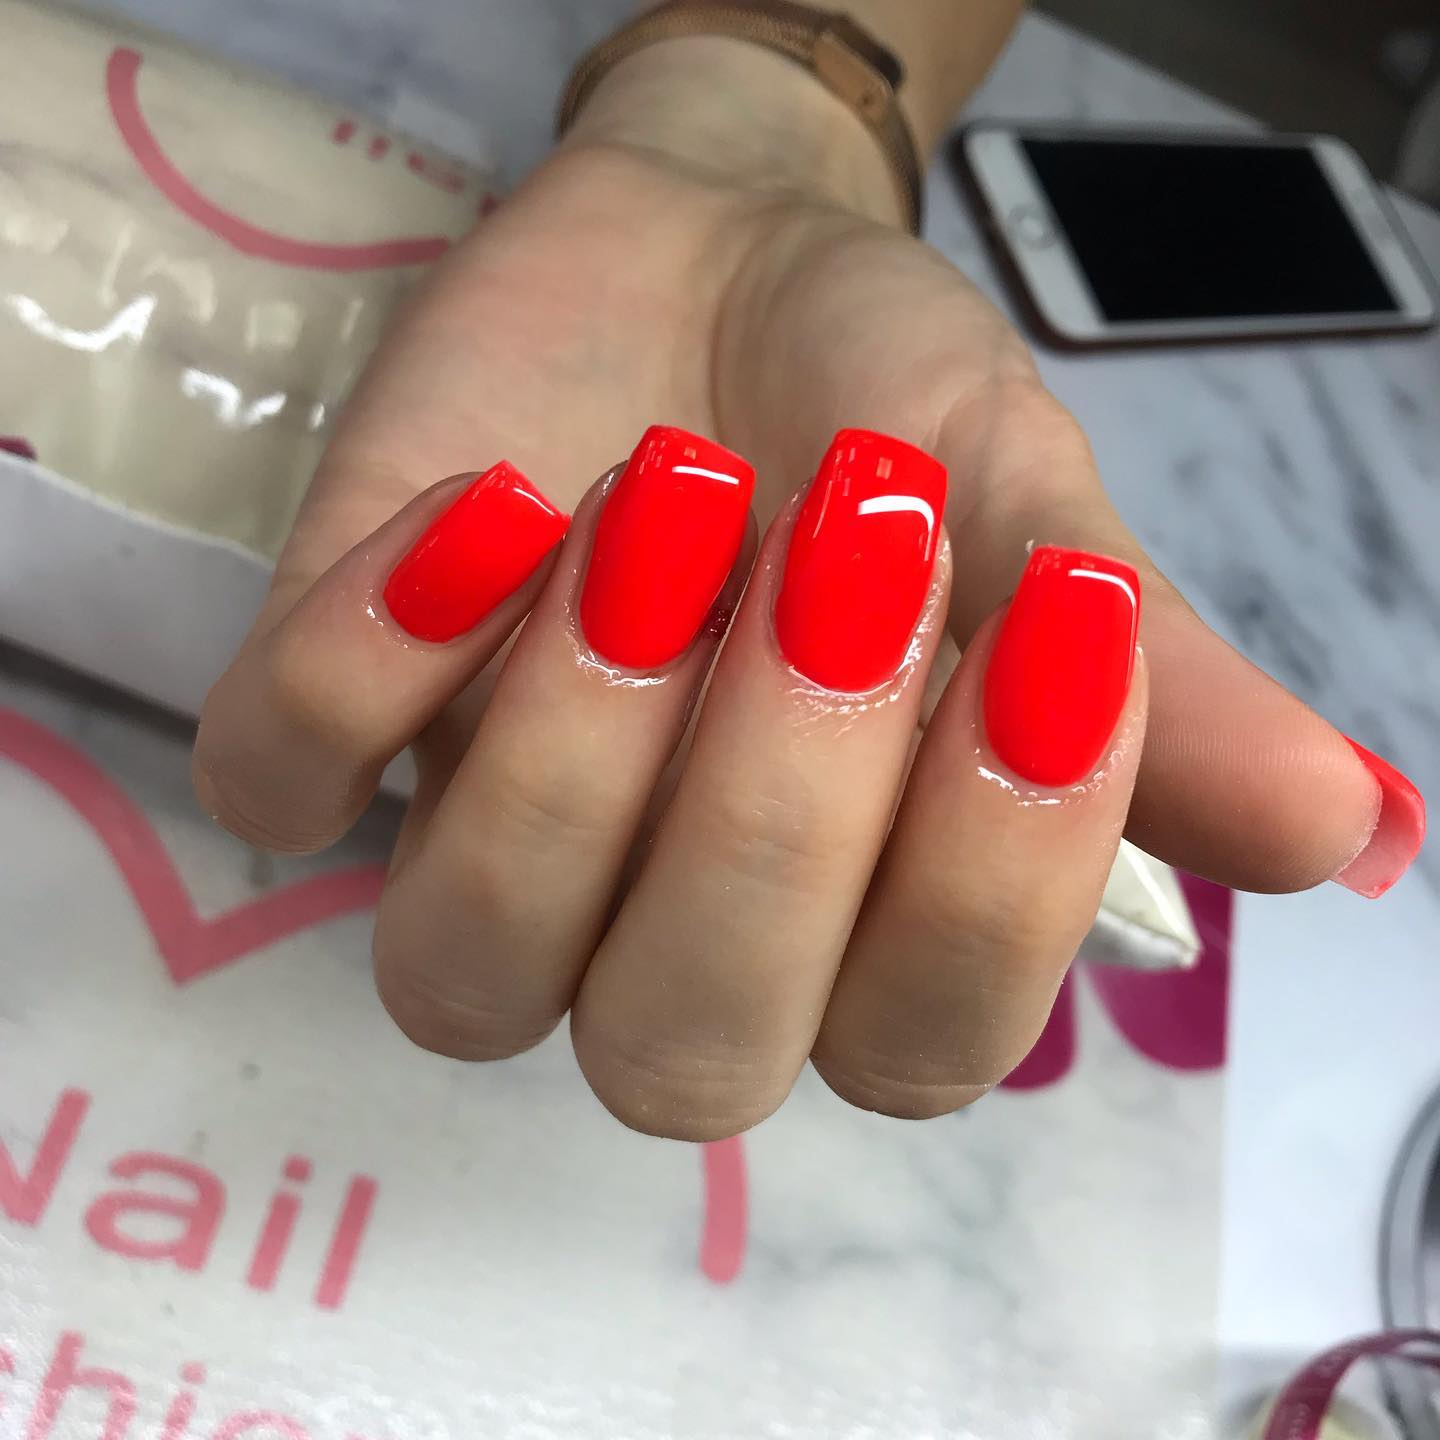 Super shiny and bright red... Isn't it a great choice for summertime?